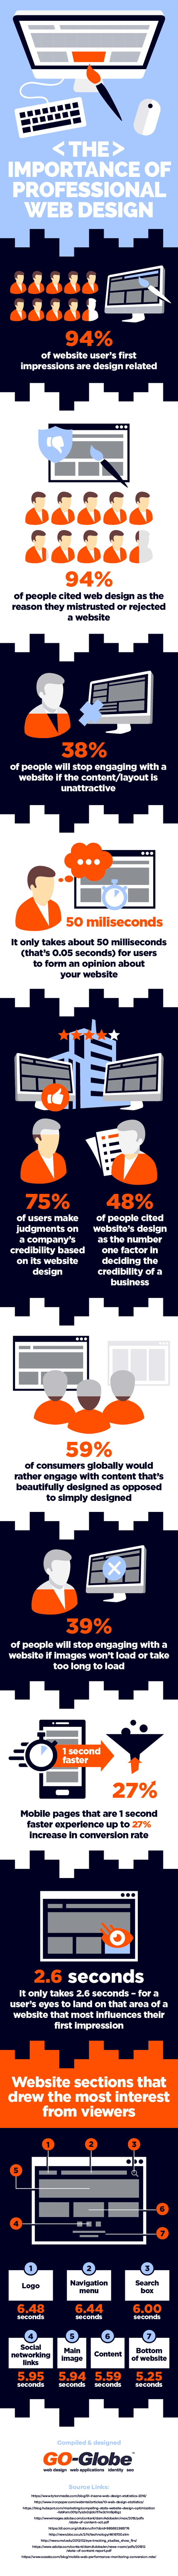 The Importance Of Professional Web Design